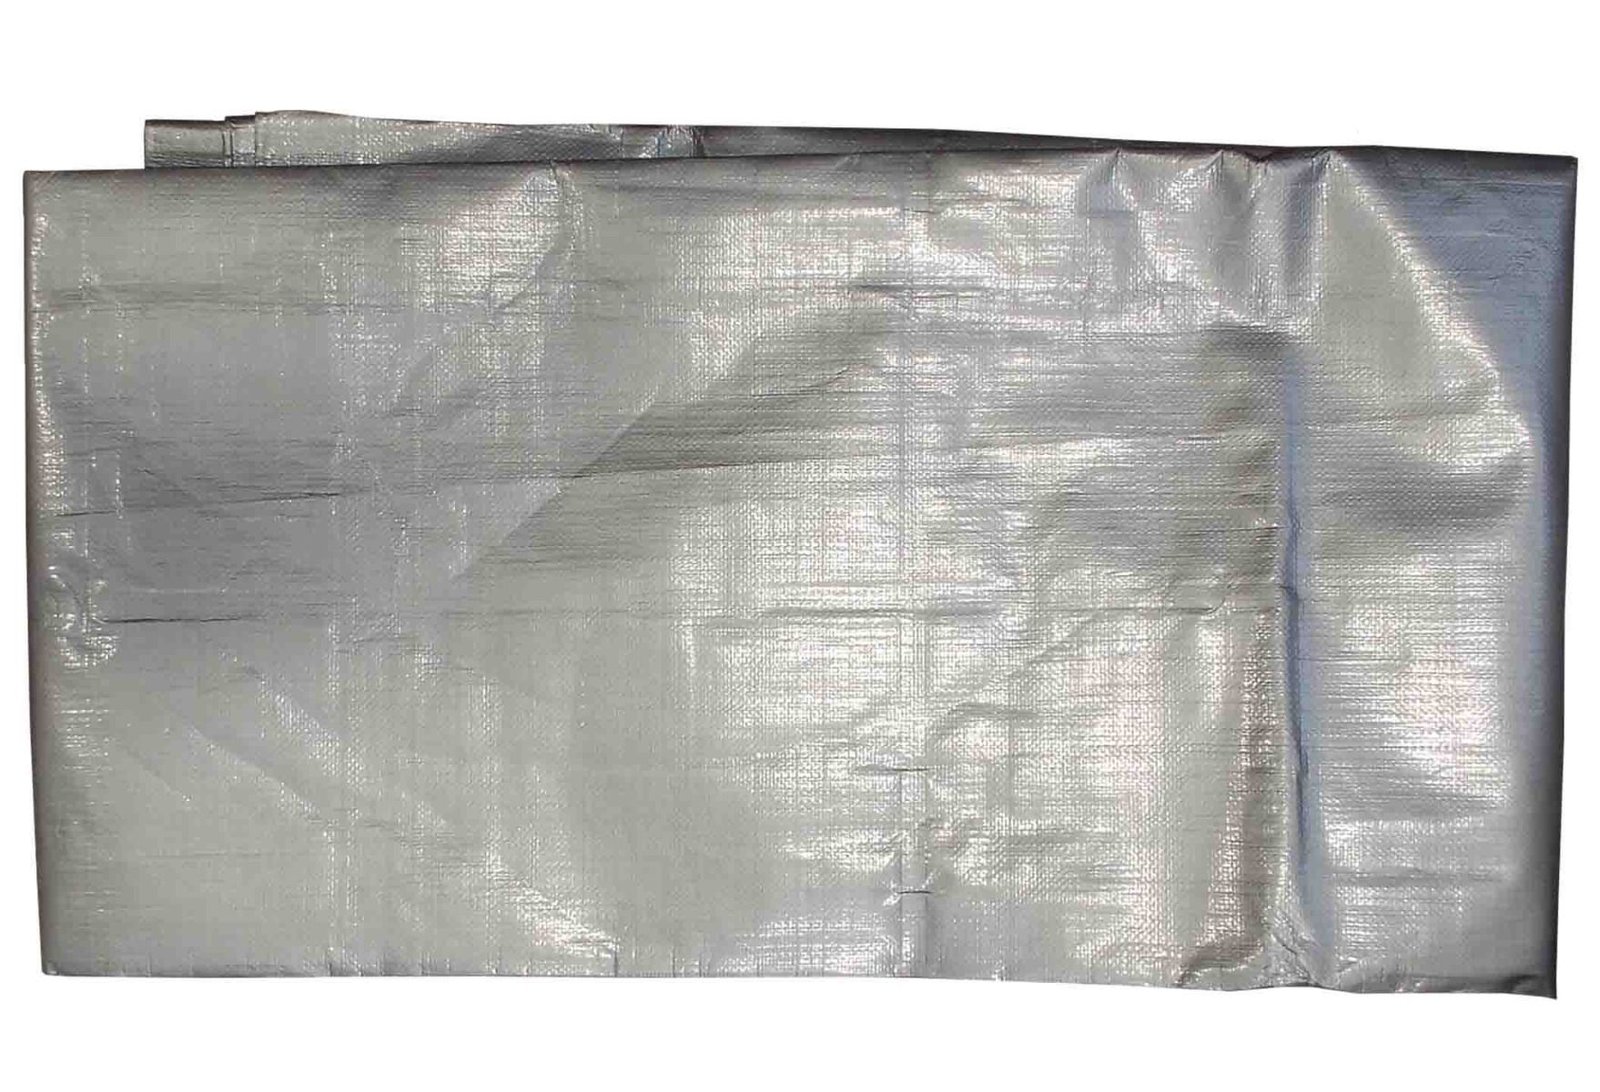 Extremaly Strong Tarpaulin Waterproof 260 gsm Silver Waterproof Cover,UK STOCK 